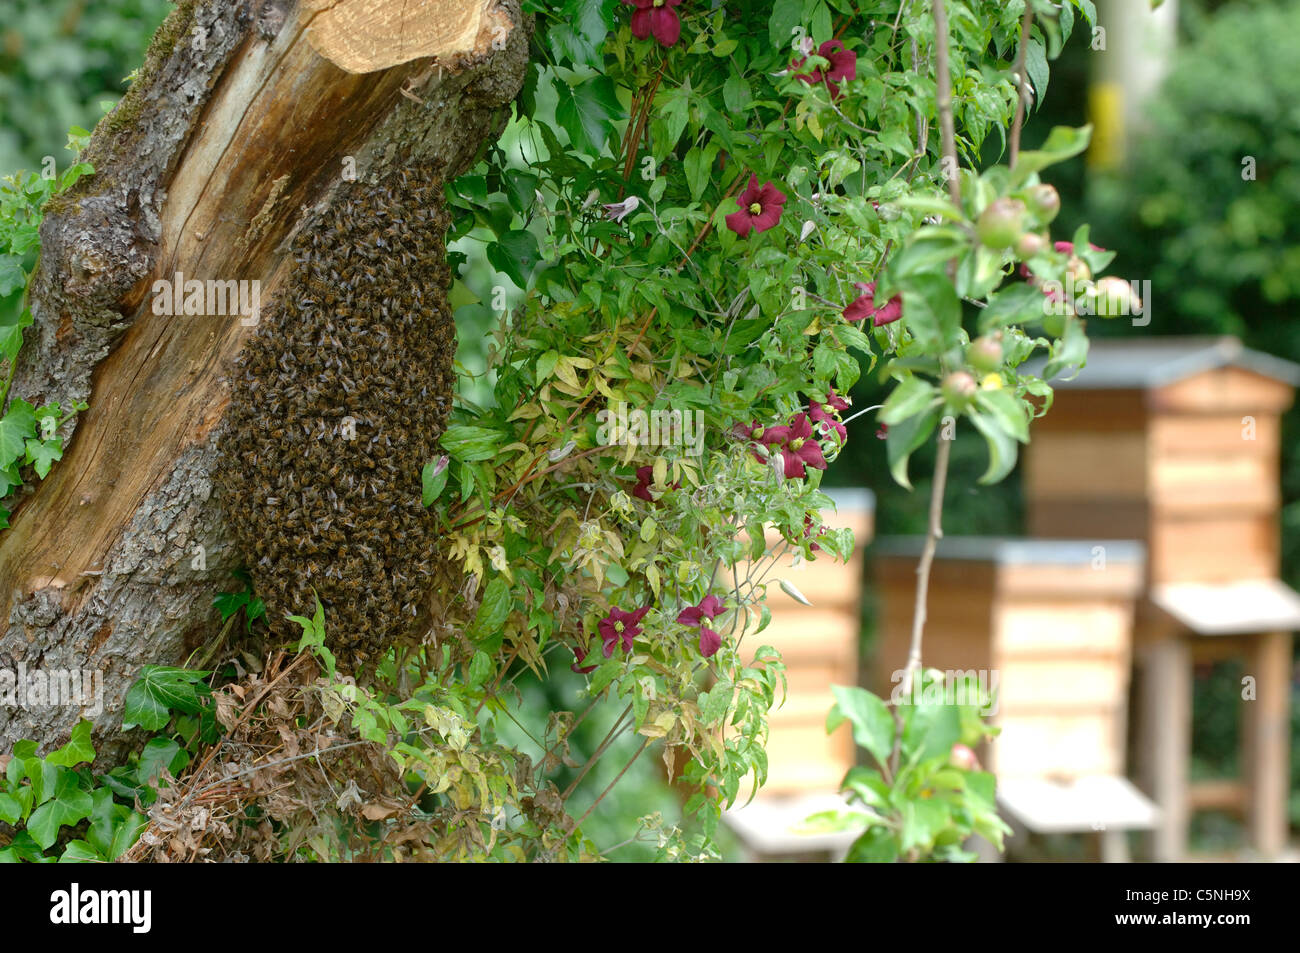 Swarm of bees clustered on an old apple tree with hives in background Stock Photo